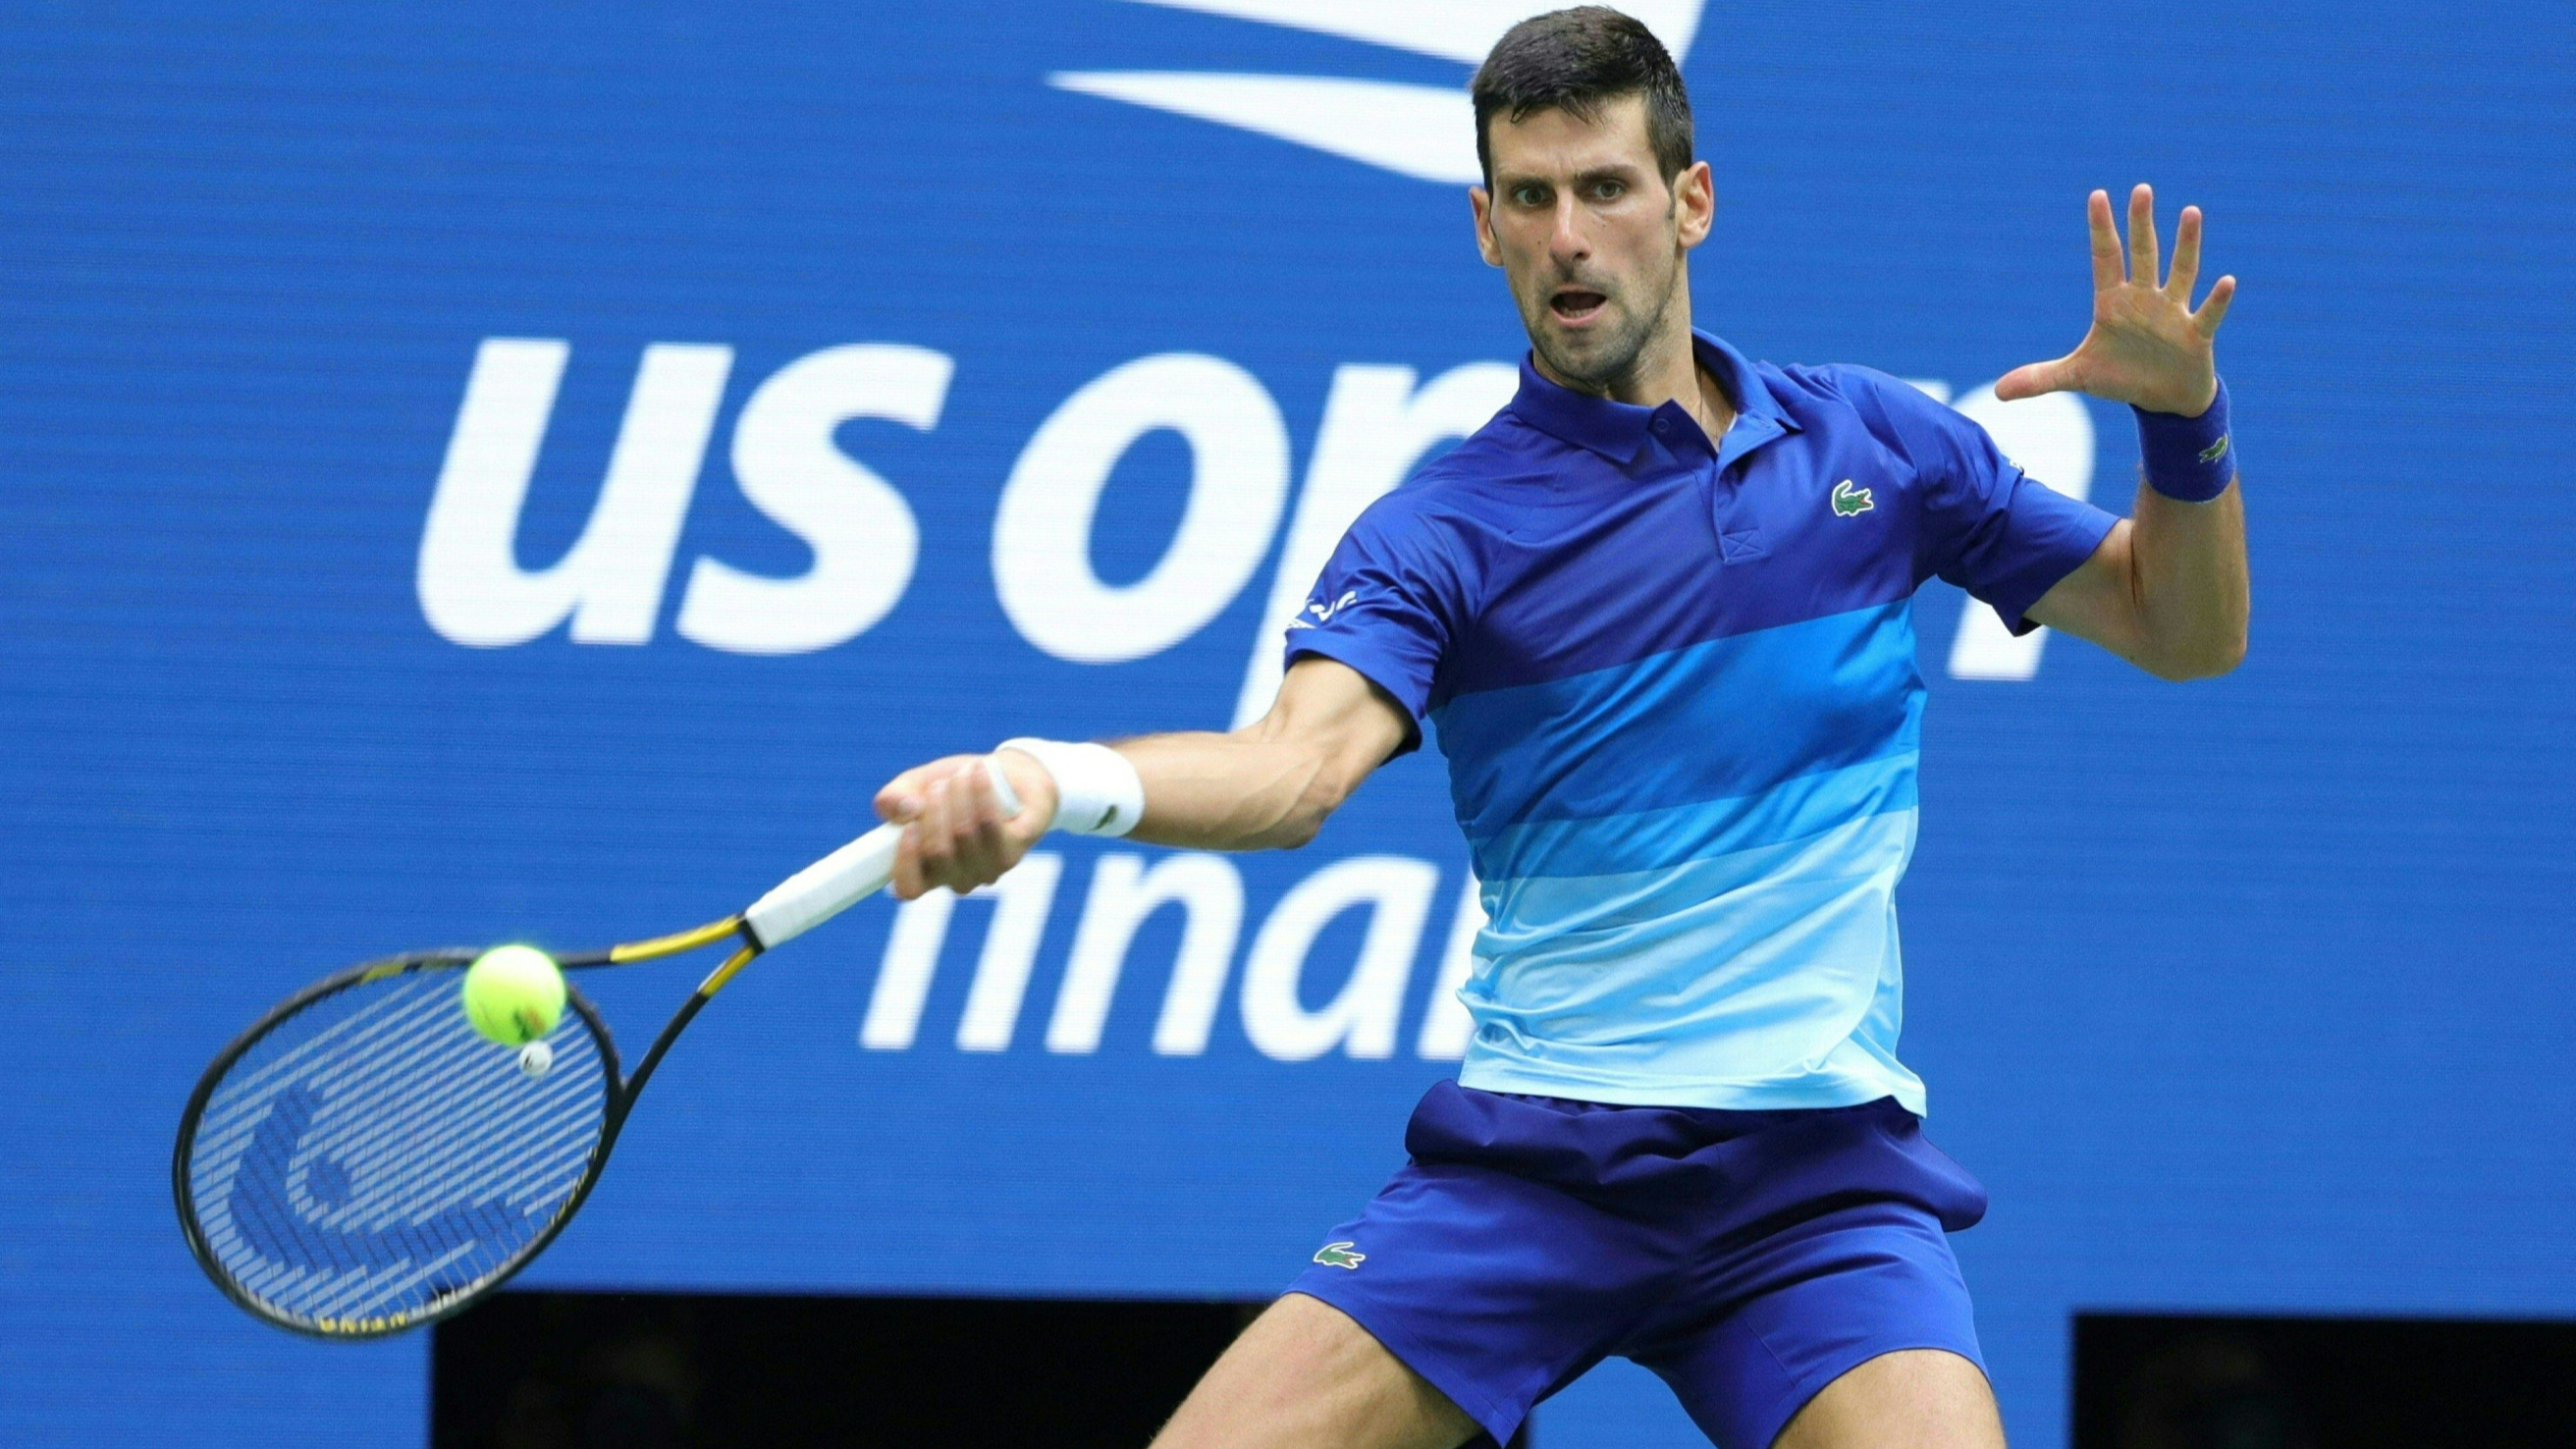 A new insect species was named after Novak Djokovic in Serbia